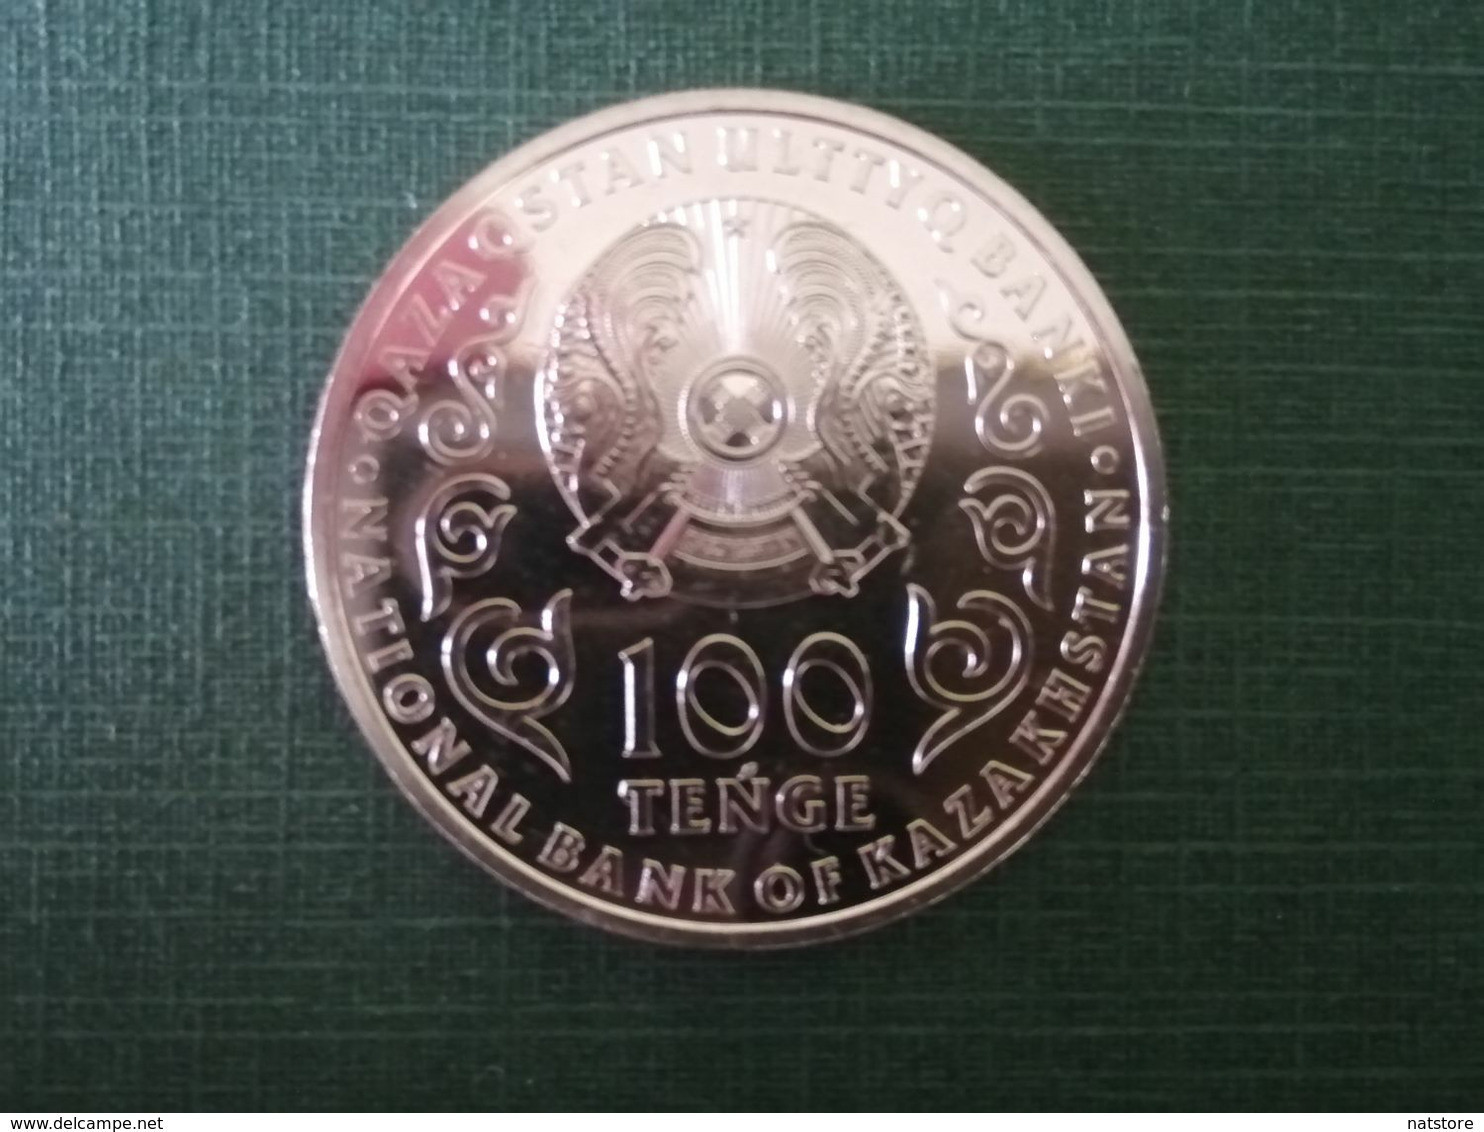 KAZAKHSTAN NEW 2020 COIN 100TENGE DEDICATED TO THE 25TH ANNIVERSARY OF ASSEMBLY OF PEOPLES OF KAZAKHSTAN - Kasachstan